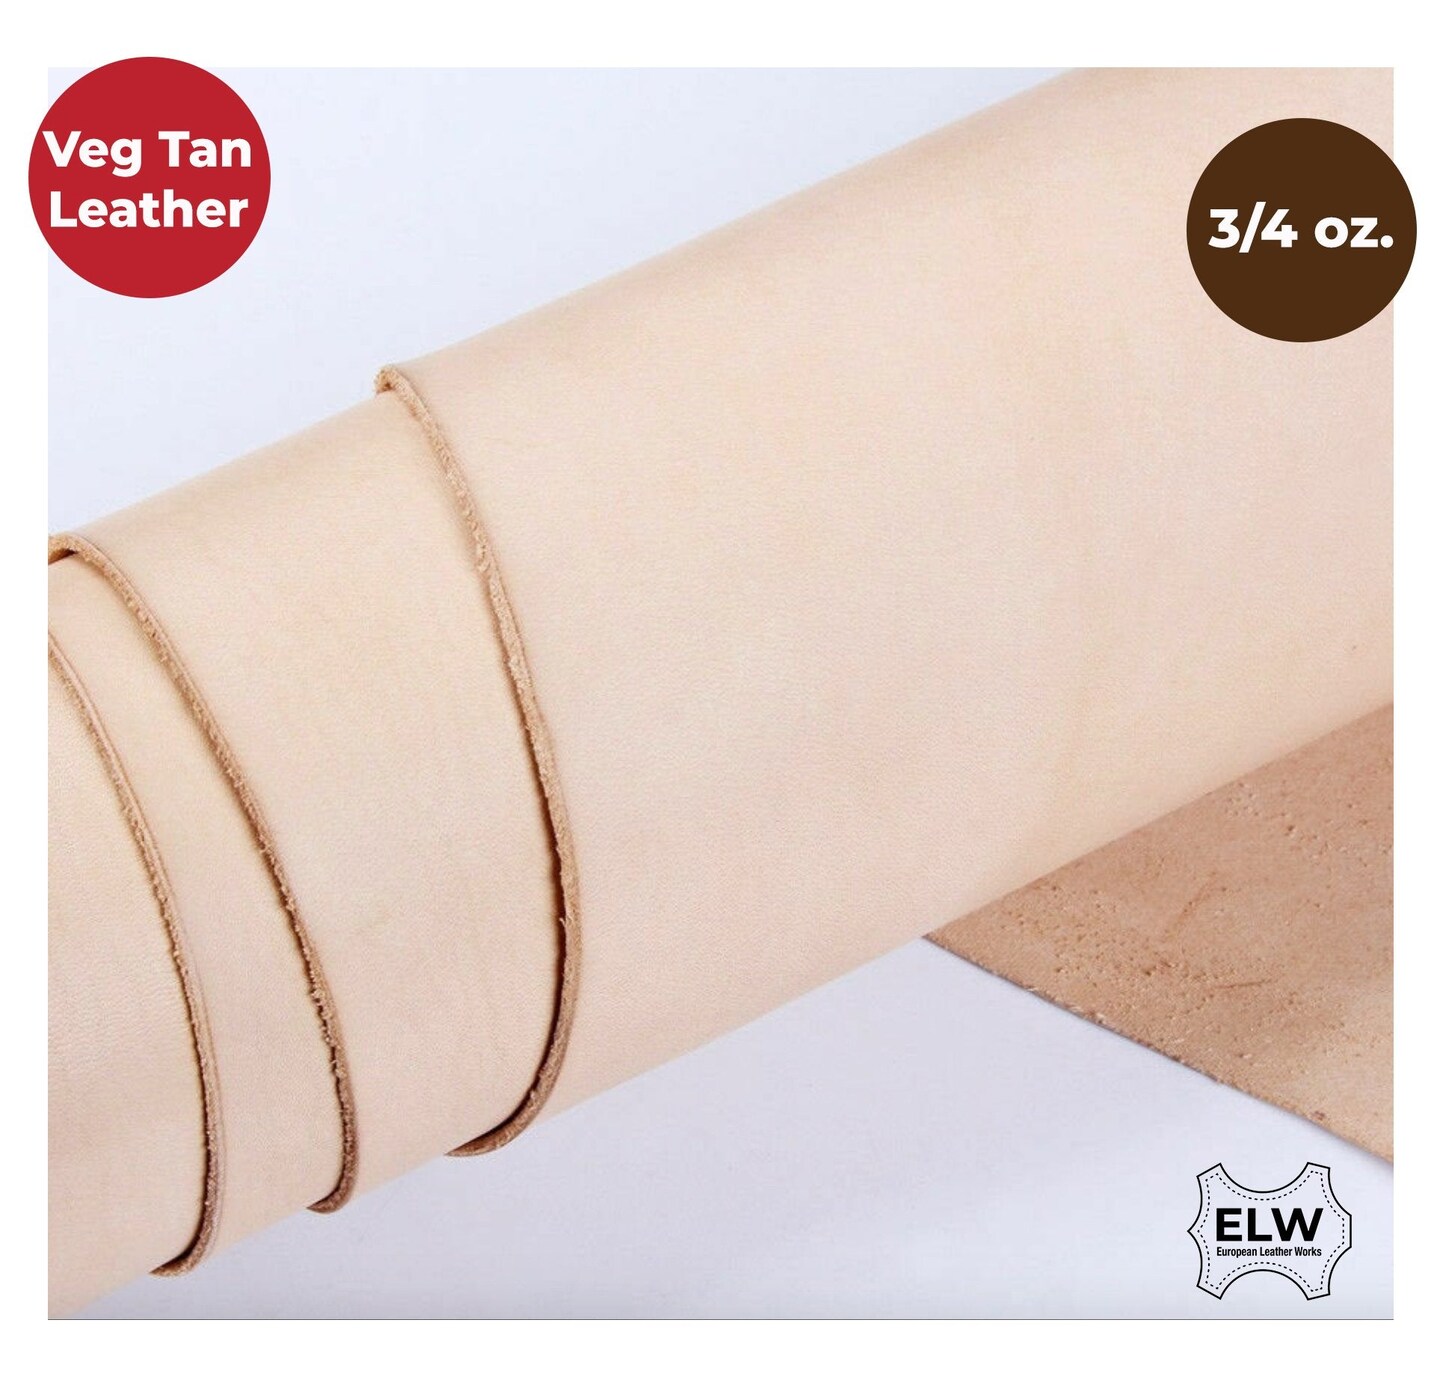 ELW Veg Tan Full Grain Leather Cowhide Pre-Cut Pieces 3/4 oz. (1.2-1.6 mm) - Import AA Grade Tooling Leather Hide - Vegetable Tanned Leather for Tooling, Carving, Molding, Dyeing: (12&#x22;x24&#x22;)